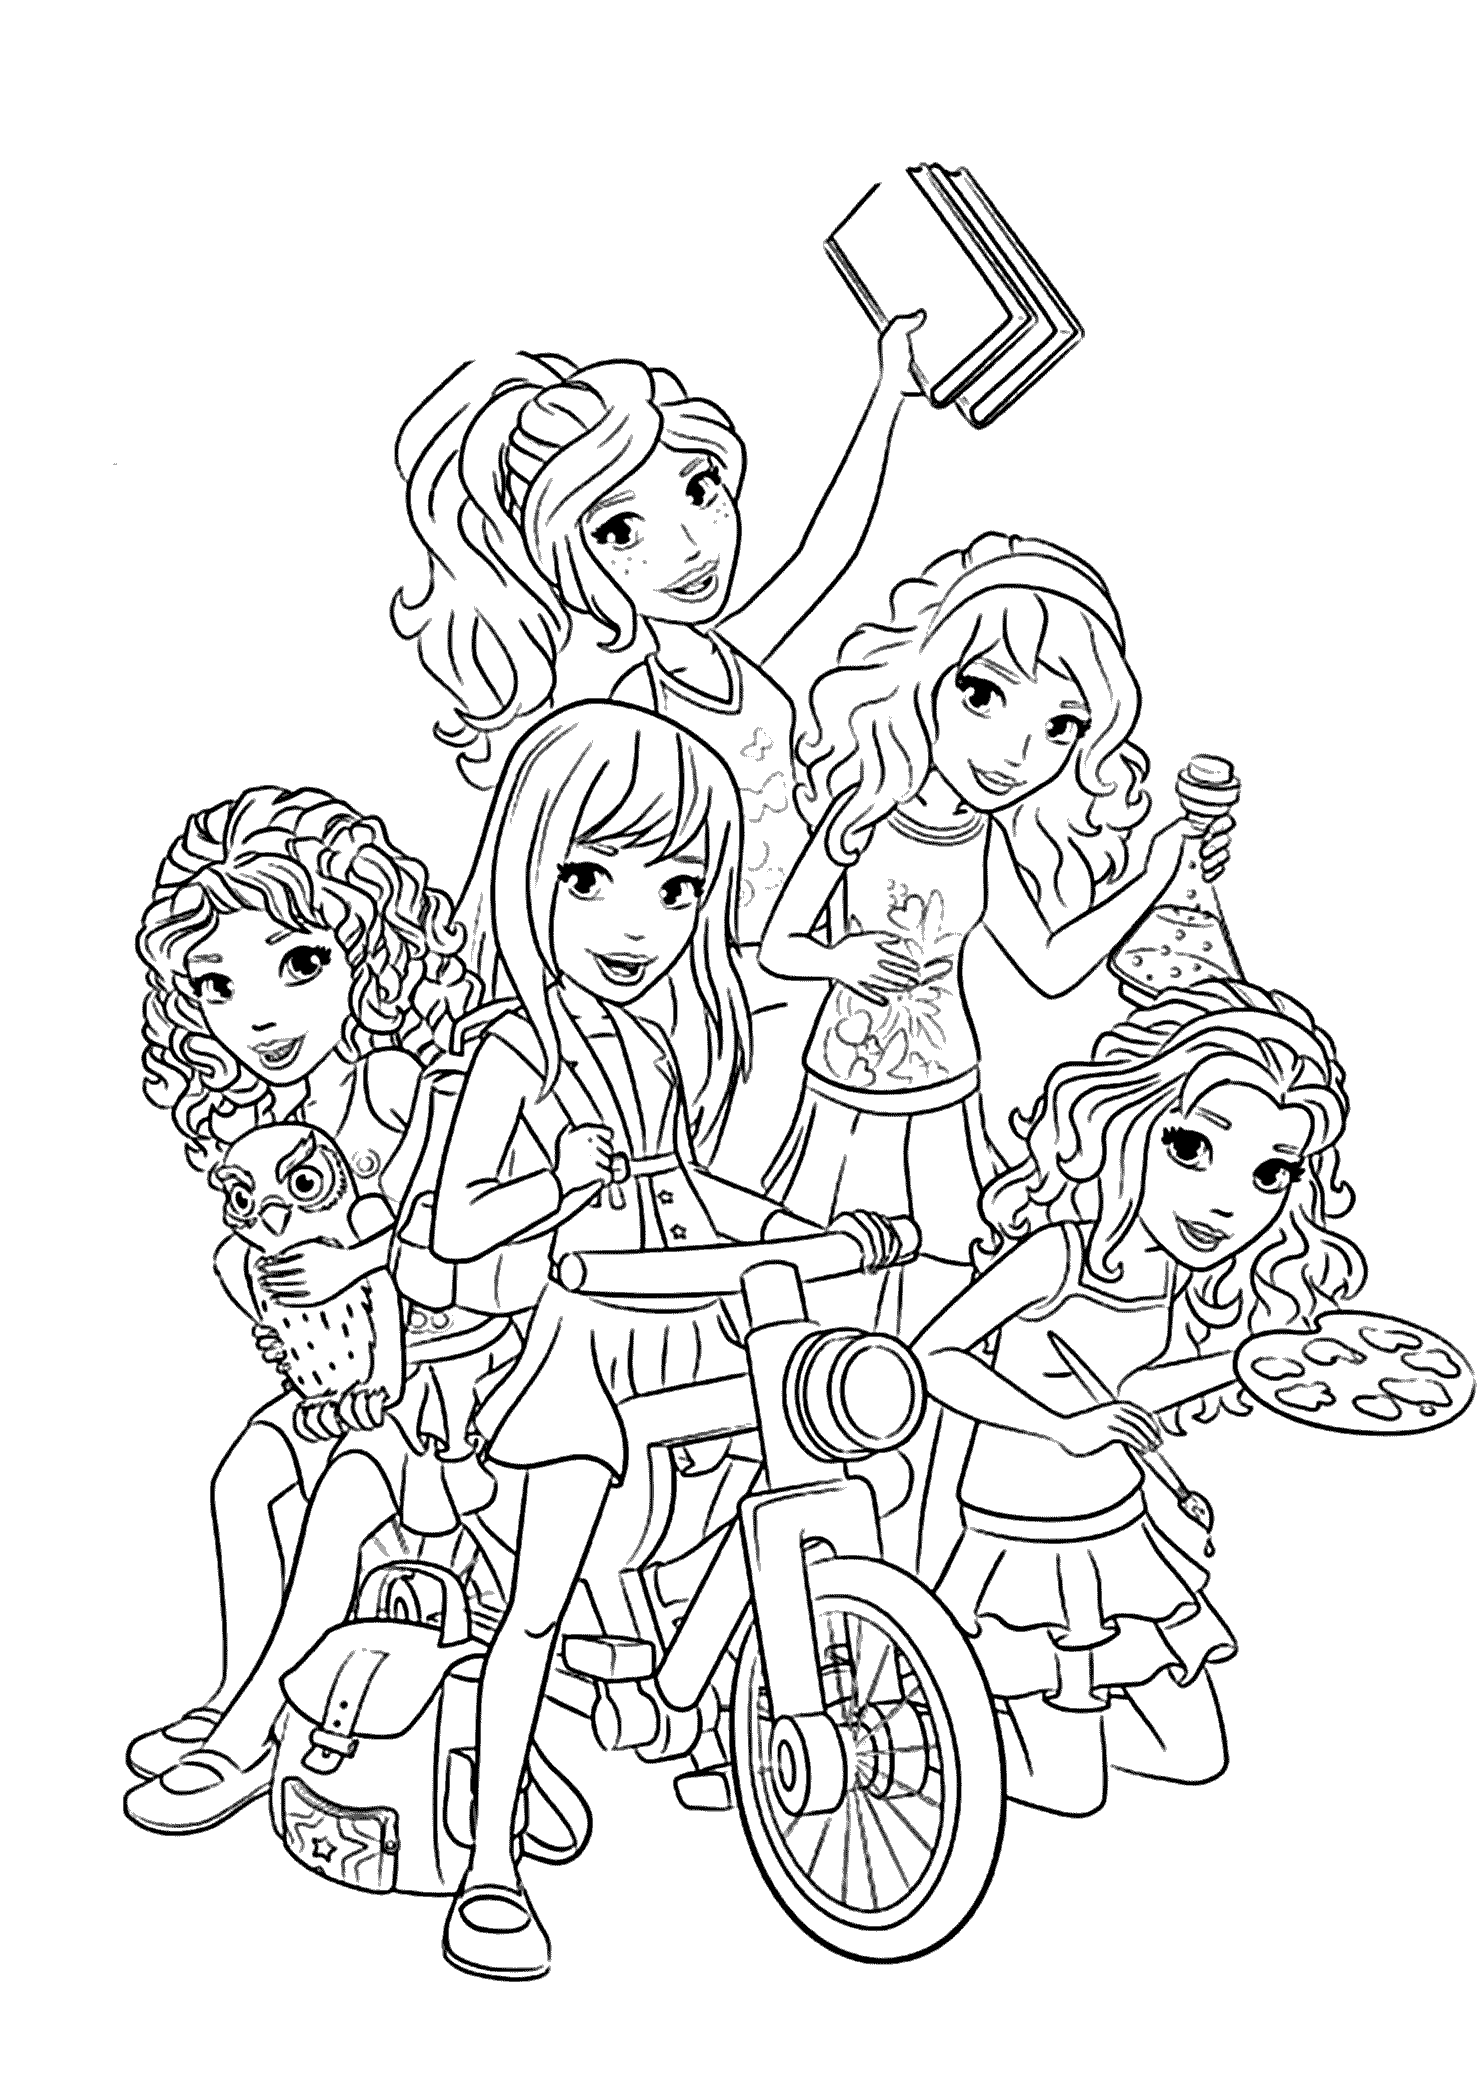 free lego friends coloring pages to print Coloring4free